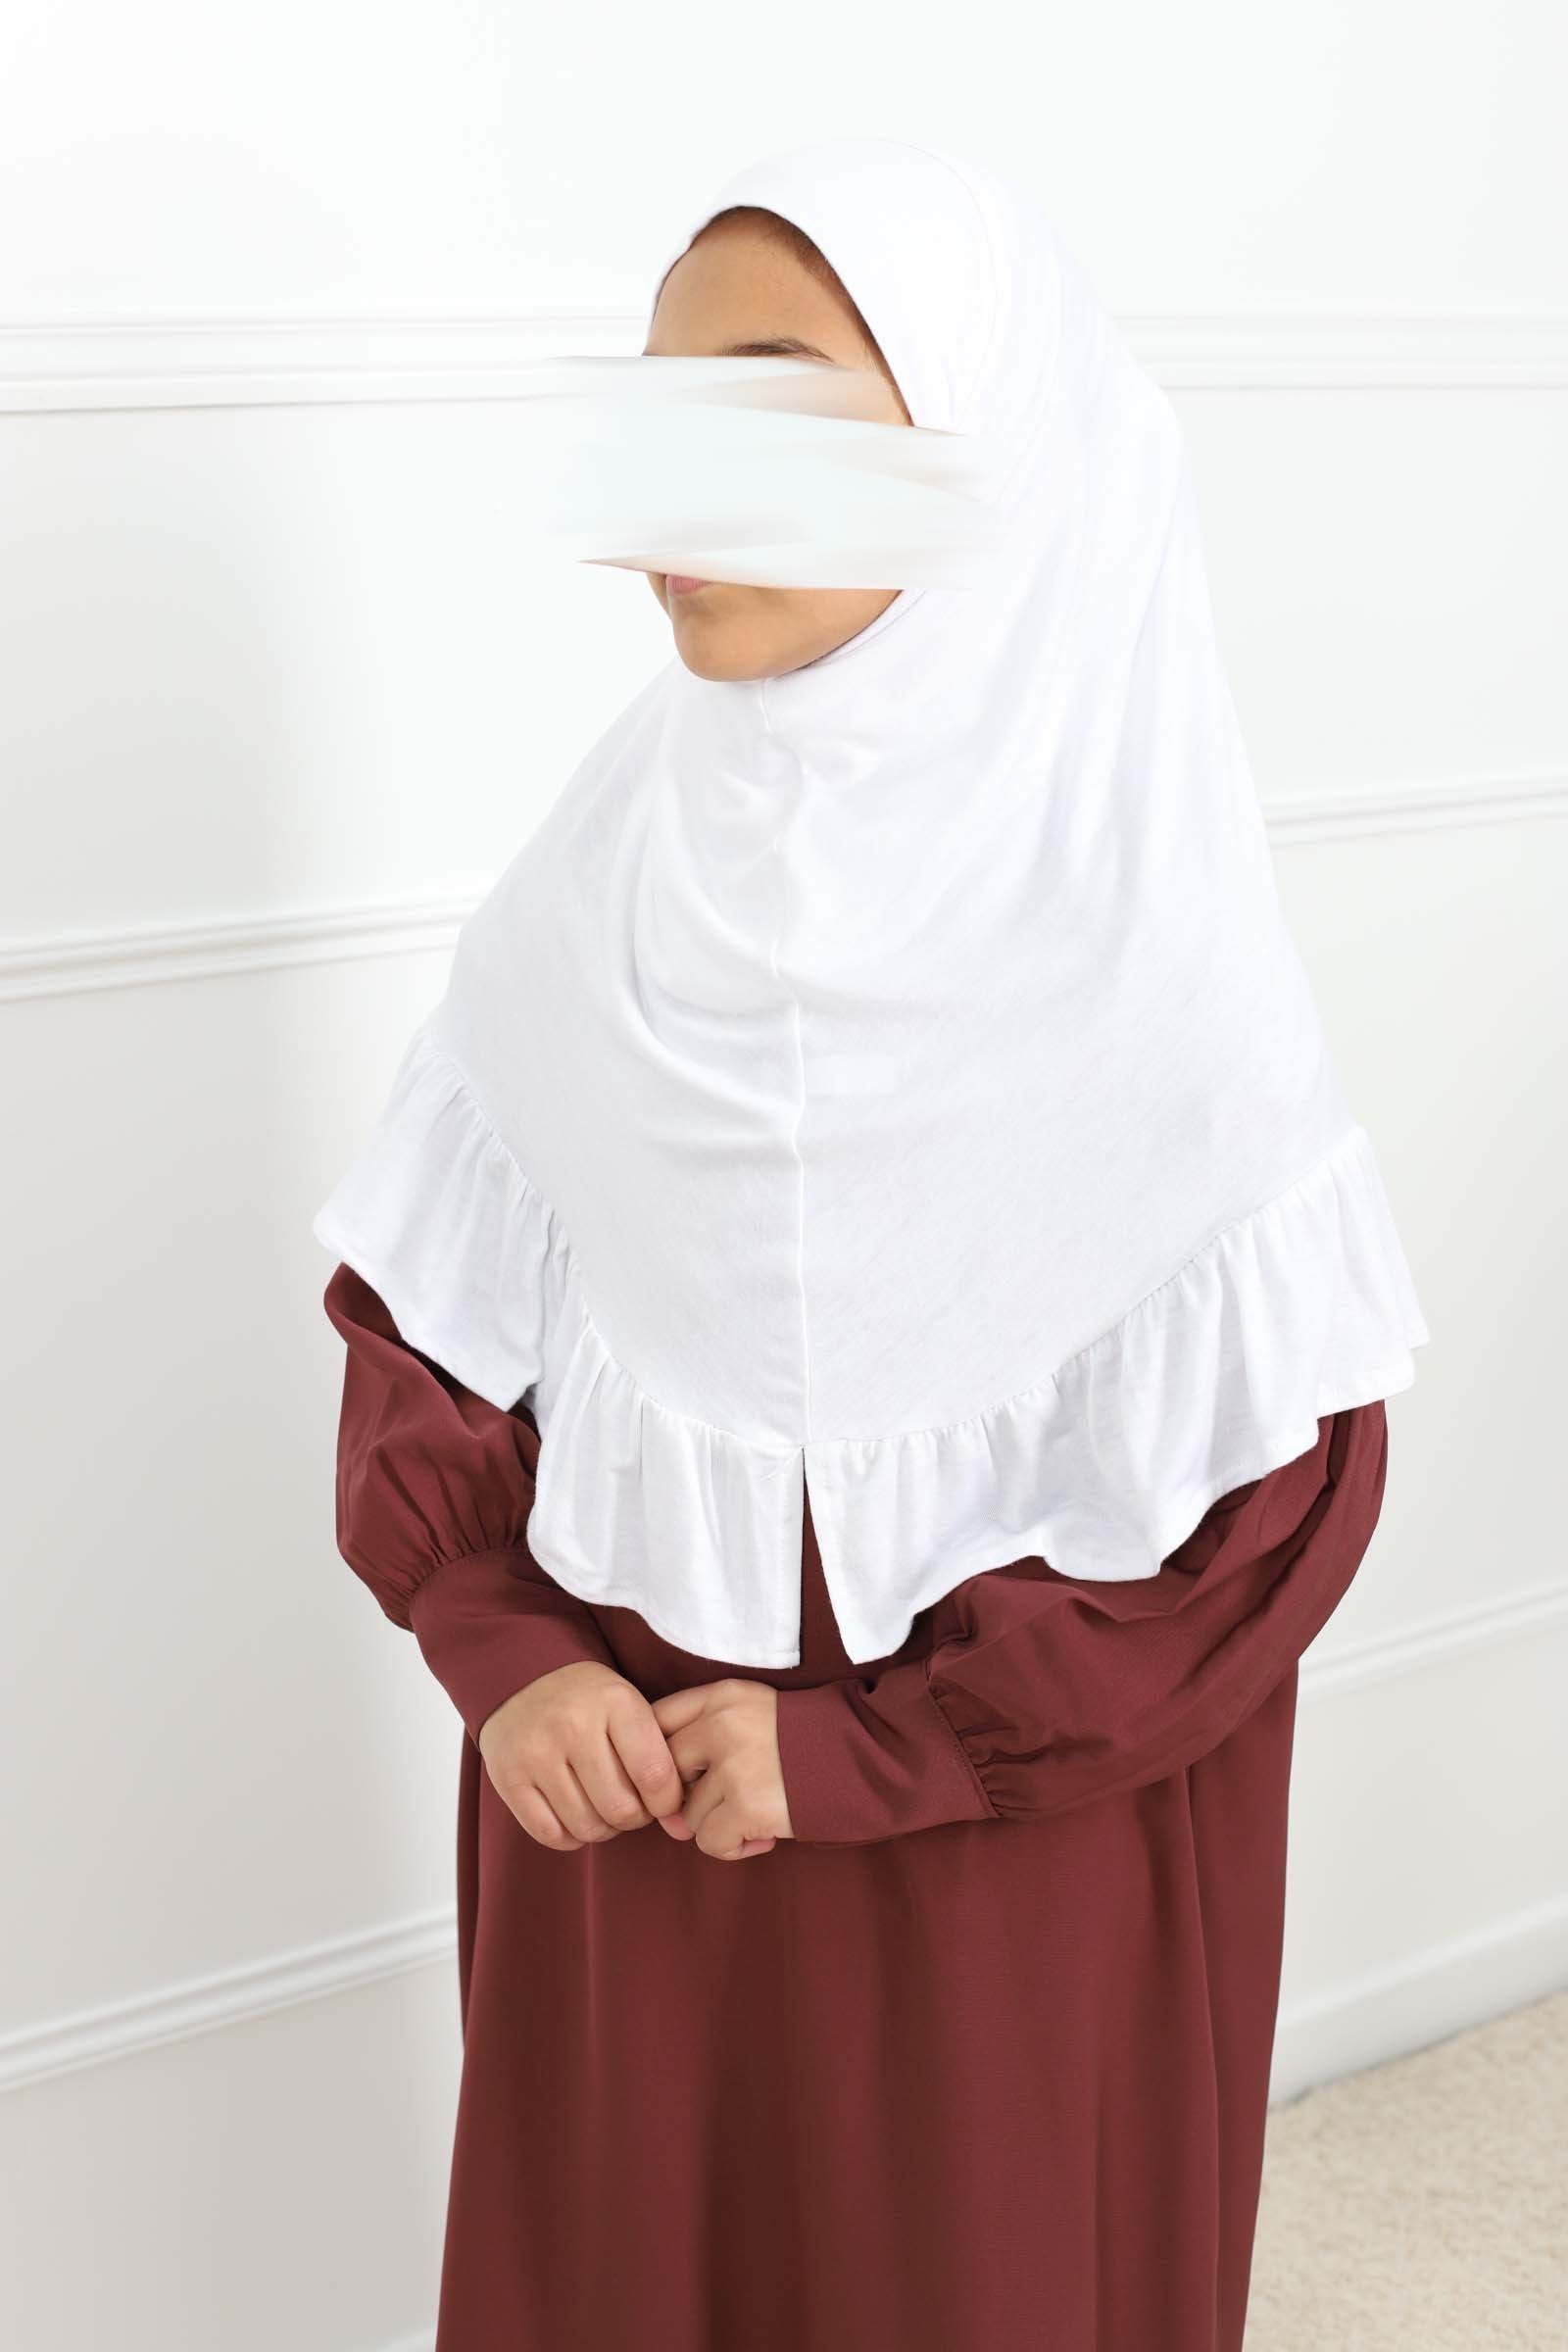 Hijab to put on little girl